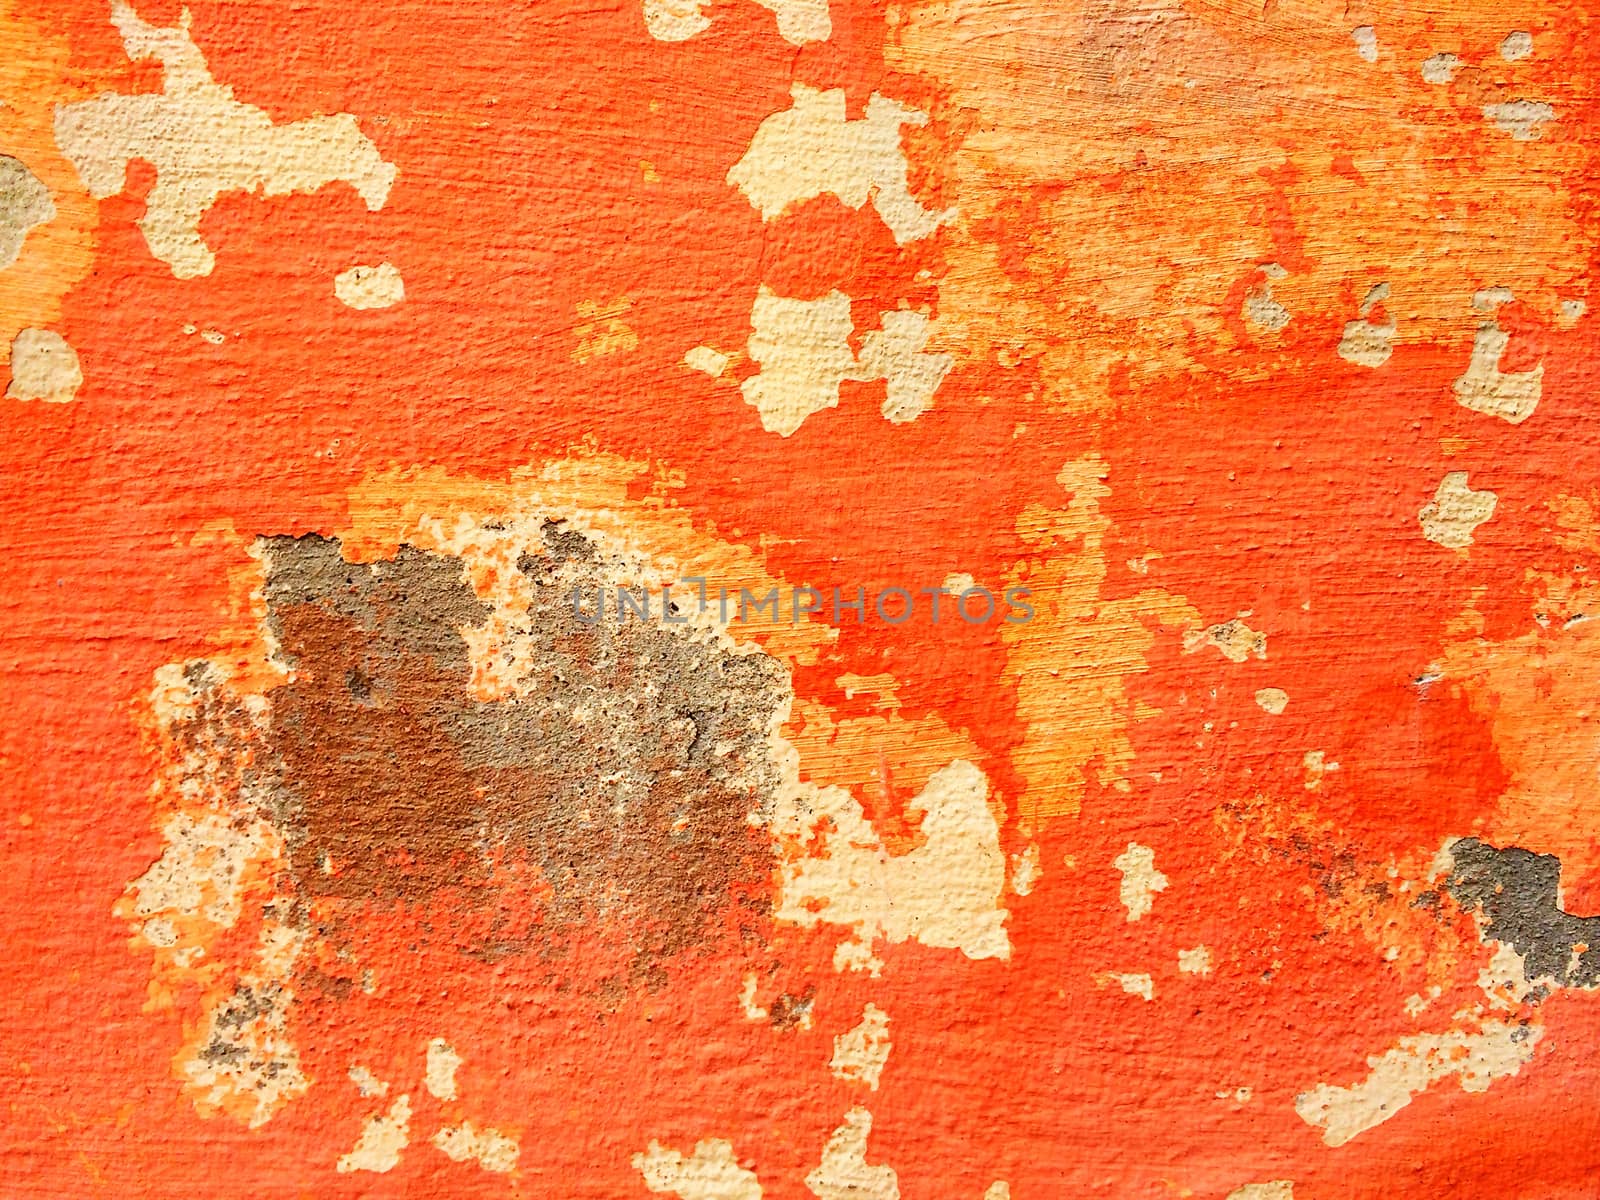 Bright orange wall with old peeling paint.